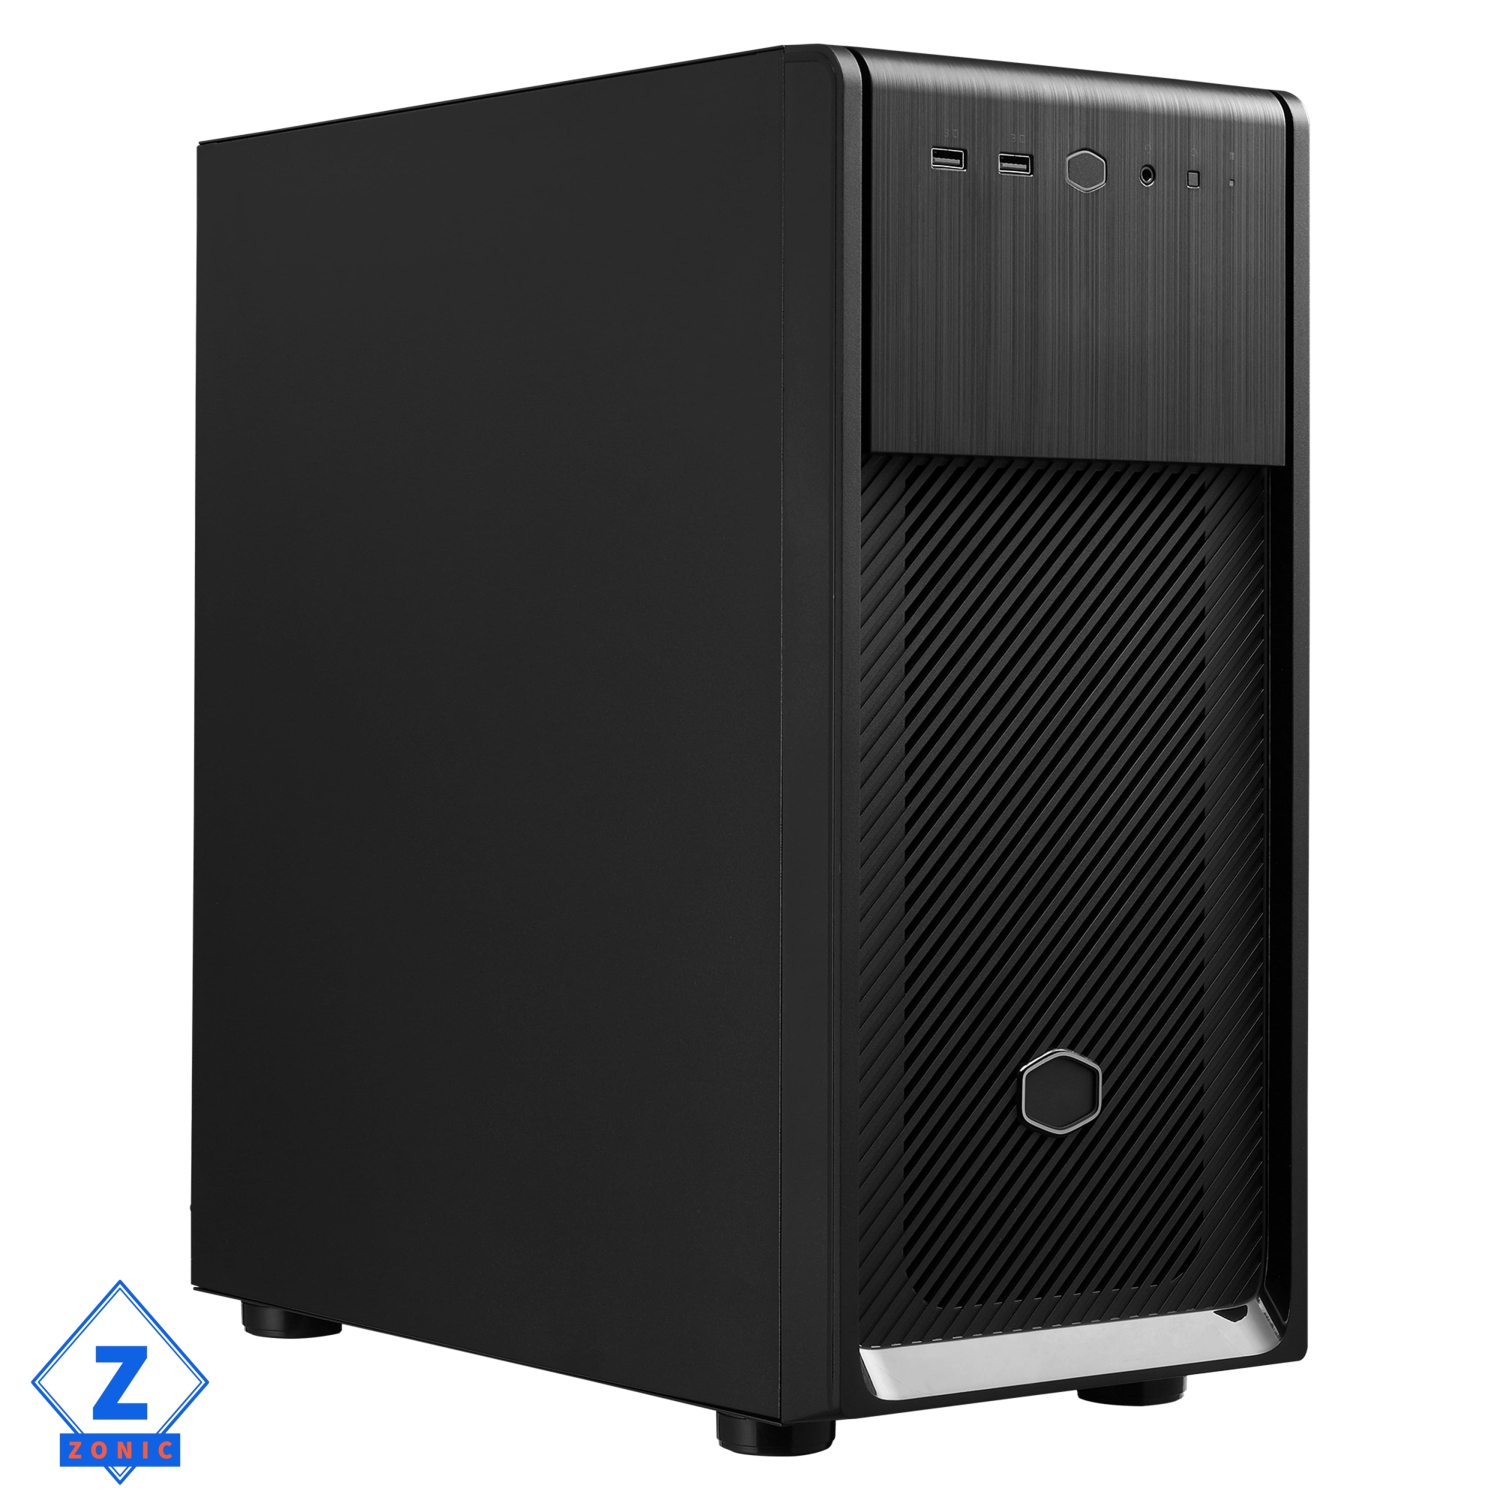 Zonic Business Custom PC, Intel Core i9-12900K, 16 Cores, 2 TB NVME SSD , 64 GB DDR 5 RAM, Built in WIFI , Keyboard, and Mouse, Windows 11 Pro